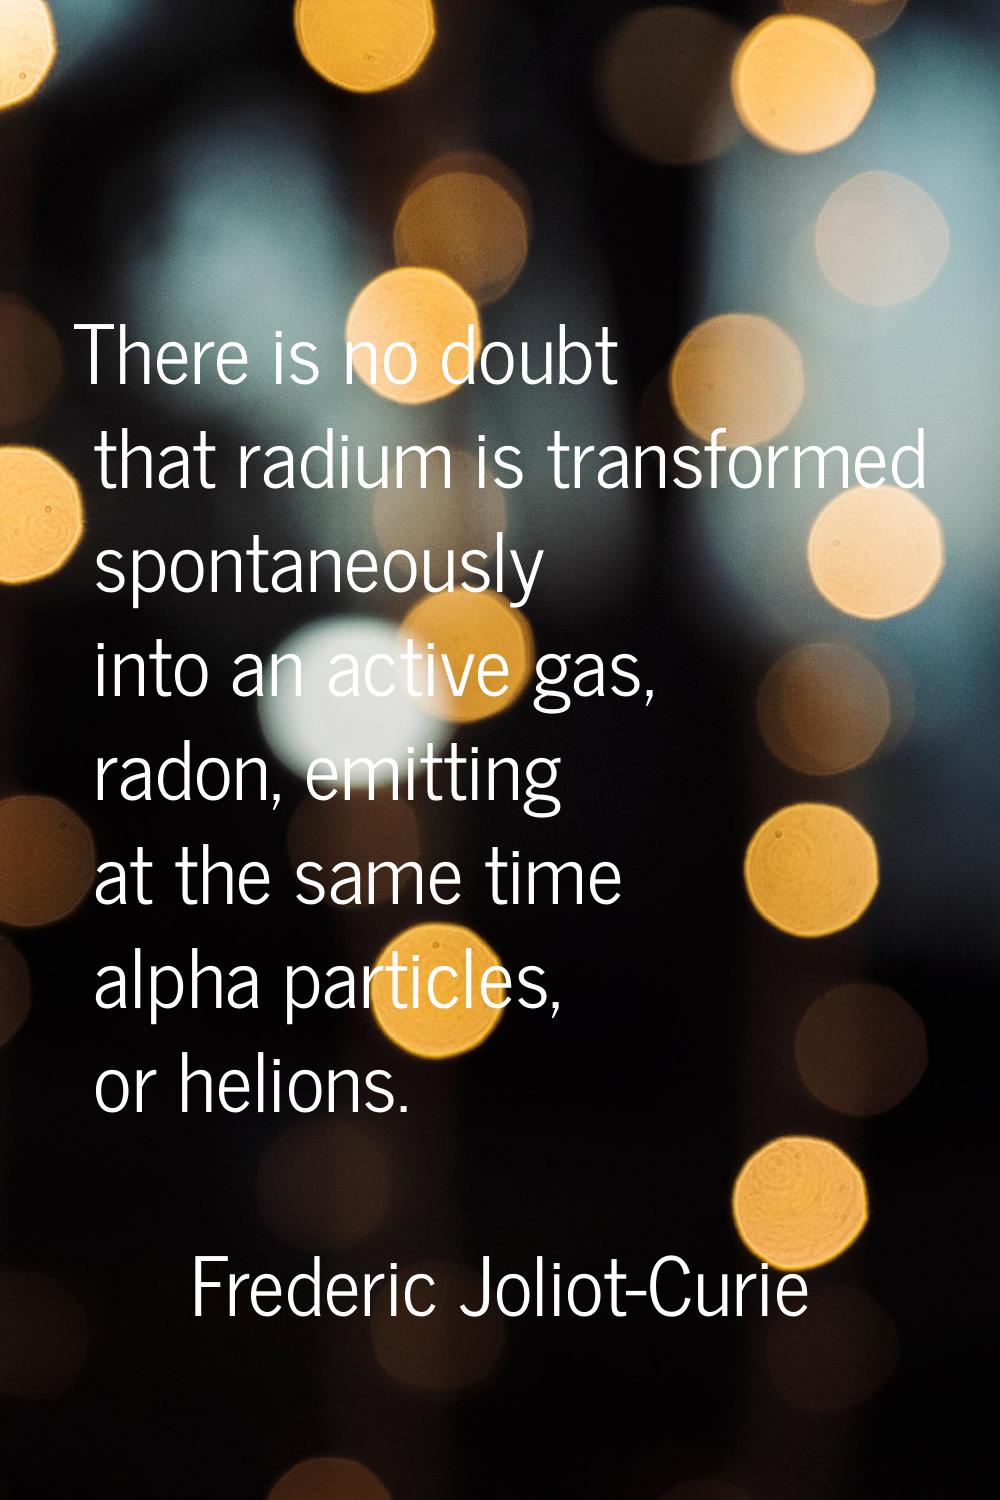 There is no doubt that radium is transformed spontaneously into an active gas, radon, emitting at t